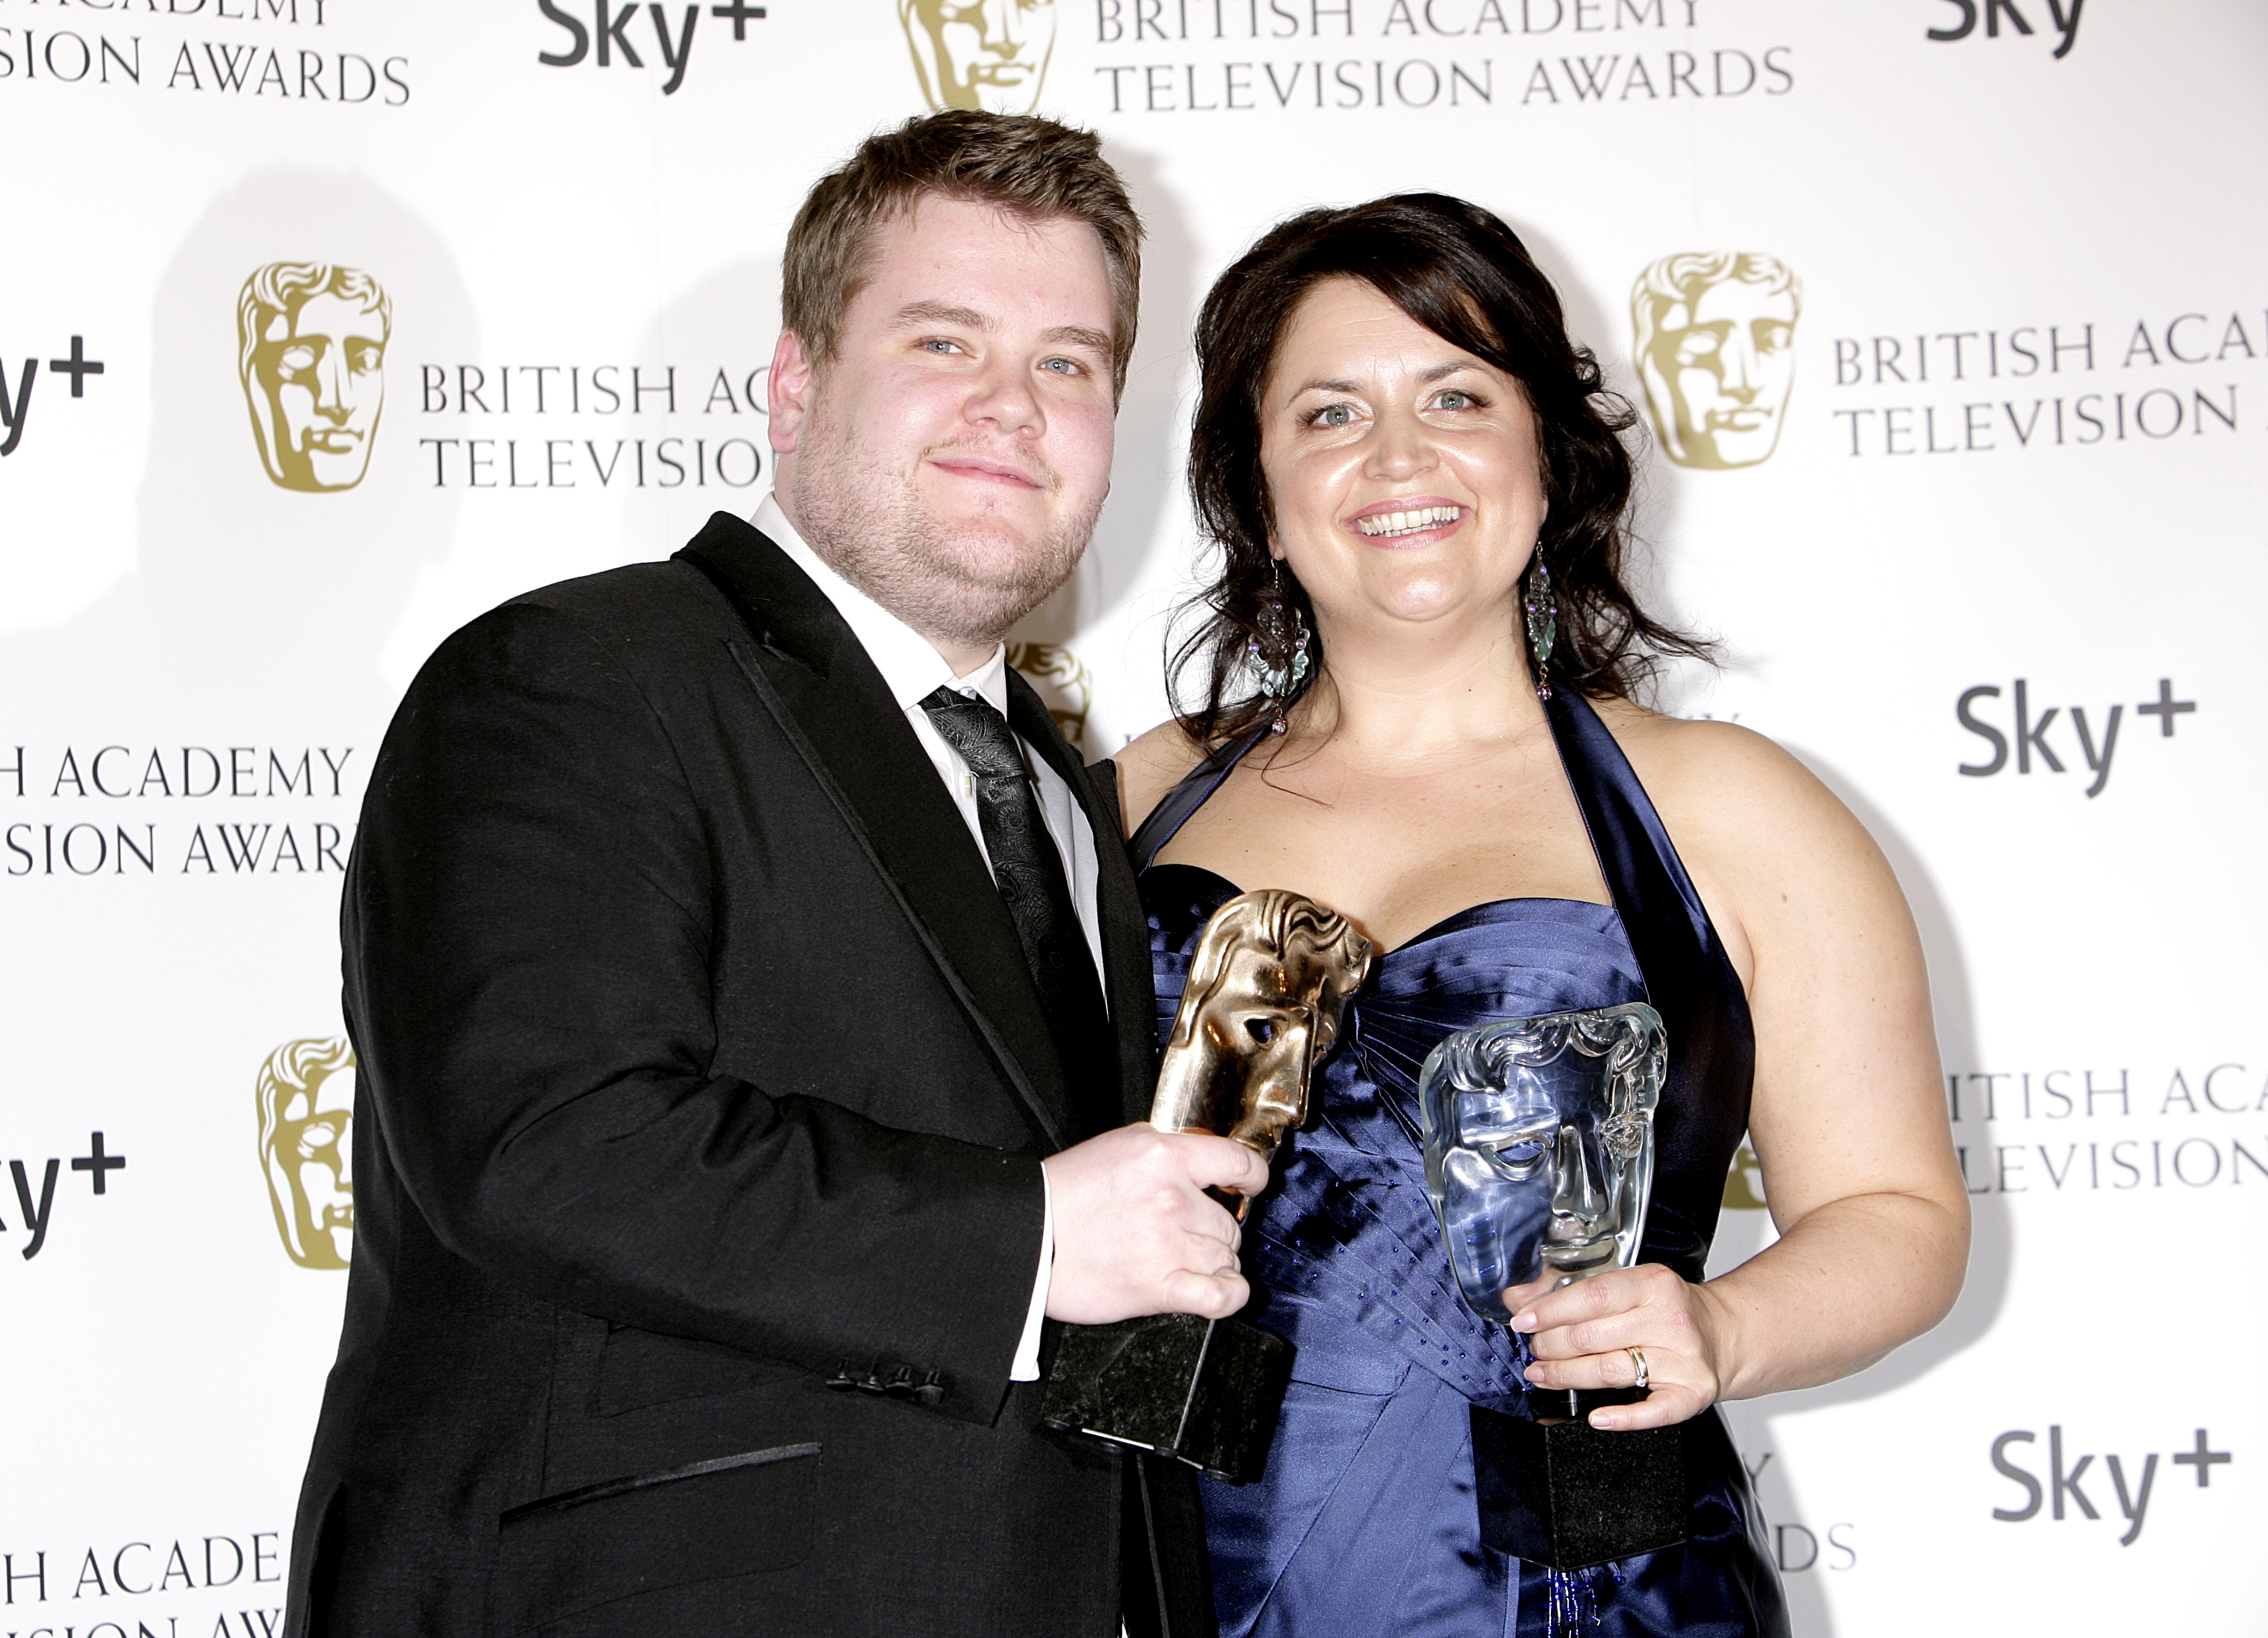 James Corden and Ruth Jones with the Programme of The Year award received for Gavin And Stacey at the British Academy Television Awards at the London Palladium in 2008. (Yui Mok - PA Images—PA Images via Getty Images)